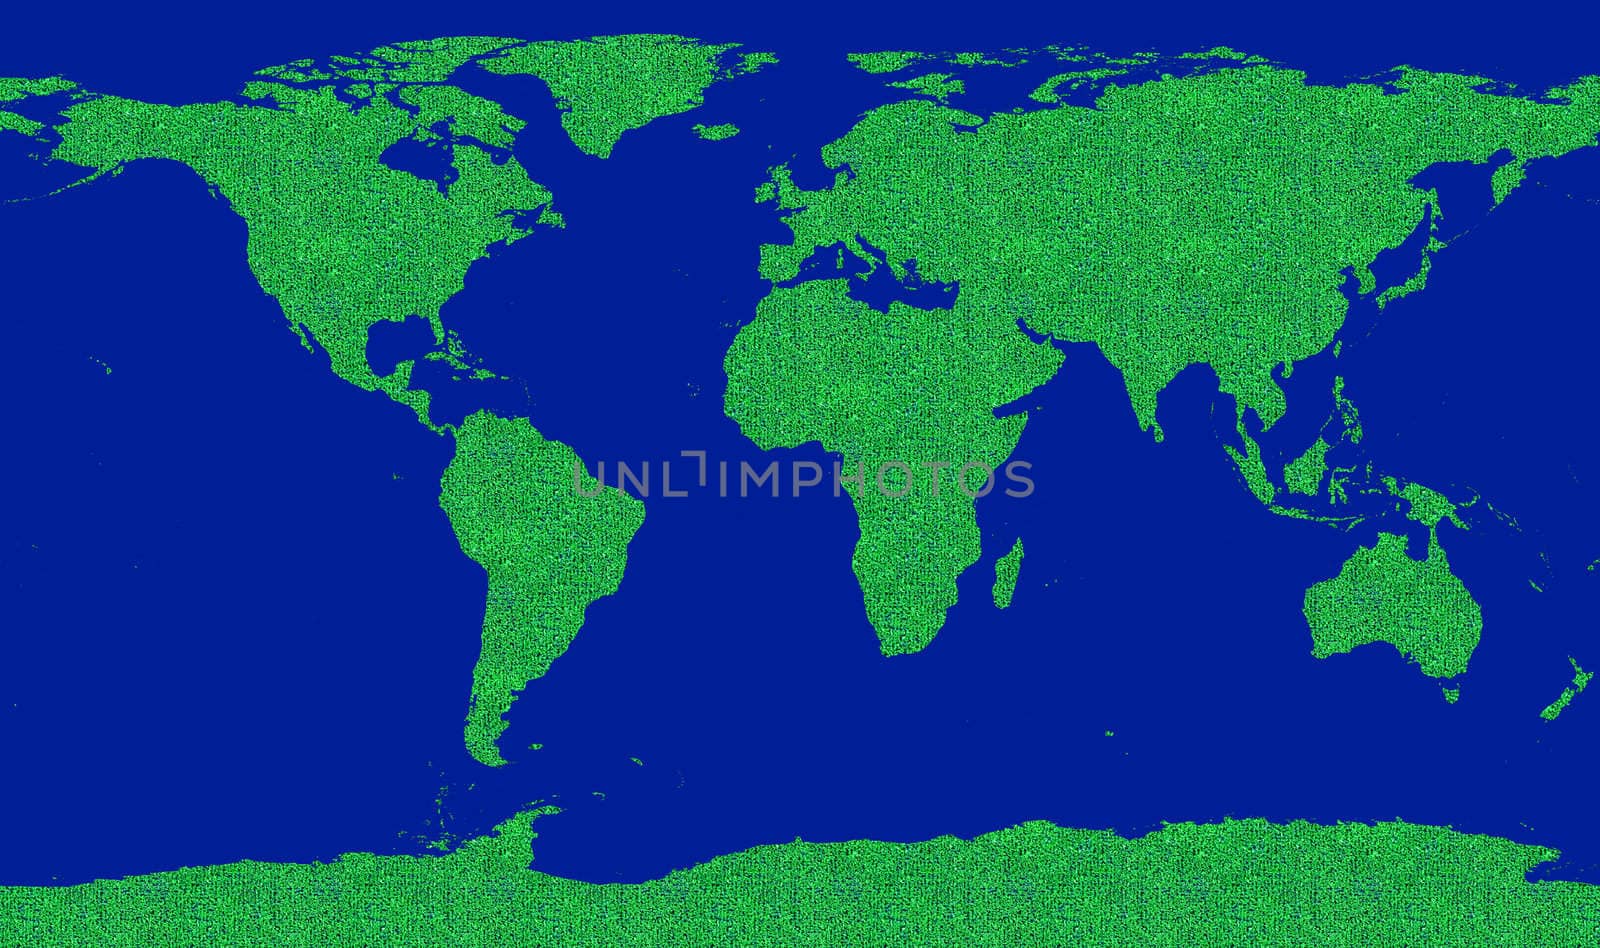 concept image about world environment saving. Map of the world filled by a green grass pattern. Go green!